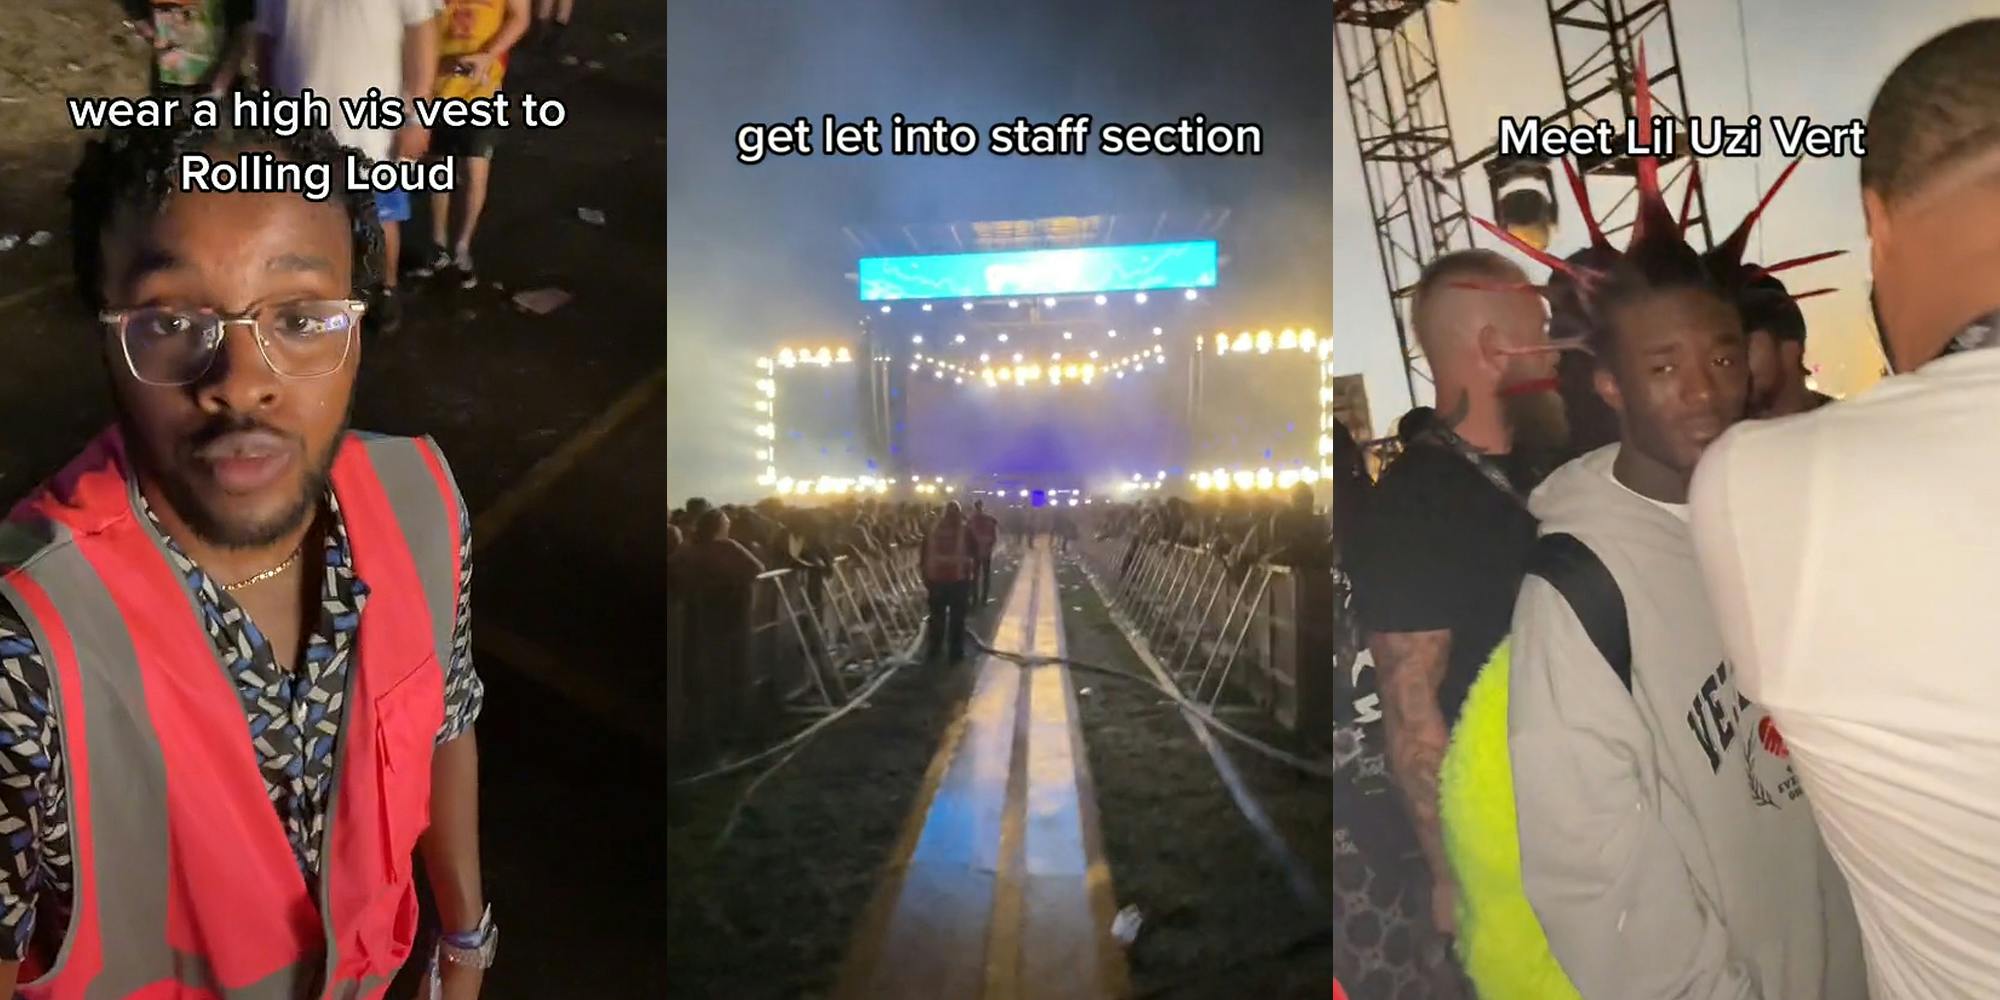 Man in orange hi-res vest outside at concert caption "wear a high vis vest to Rolling Loud" (l) Concert stage with two sections of people strip between for staff section caption "get let into staff section" (c) Lil Uzi Vert looking at camera outside caption "Meet Lil Uzi Vert" (r)